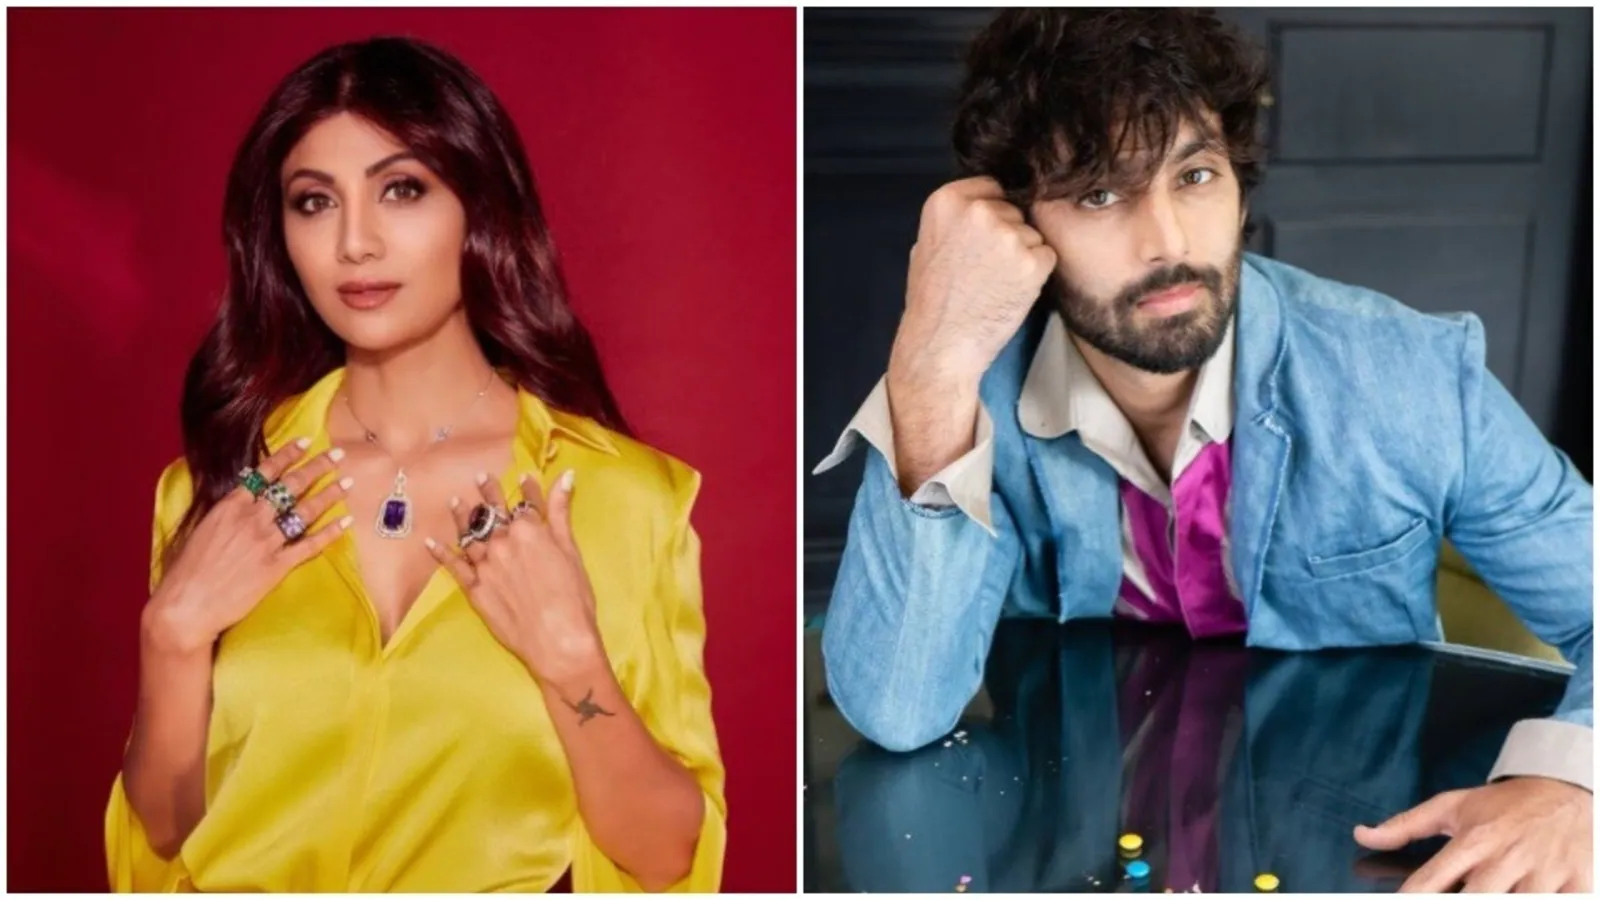 Shilpa Nude - Shilpa Shetty gets Himansh Kohli's support: 'Industry is safe. We have  accepted, celebrated Sunny Leone'